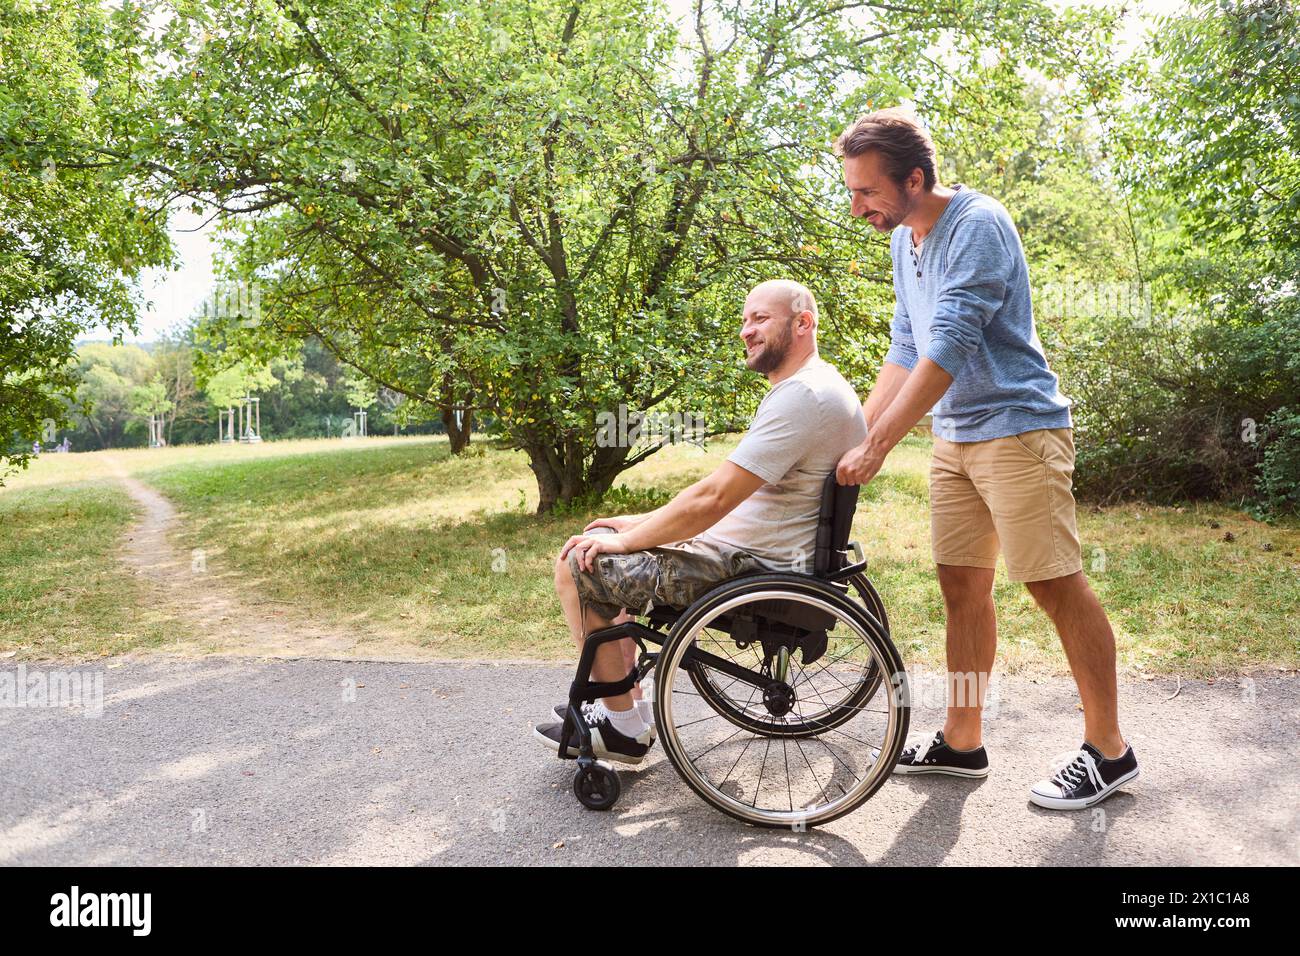 A man using a wheelchair sharing a joyful moment with his friend outdoors. They are in a leafy park, emphasizing friendship and inclusion. Stock Photo